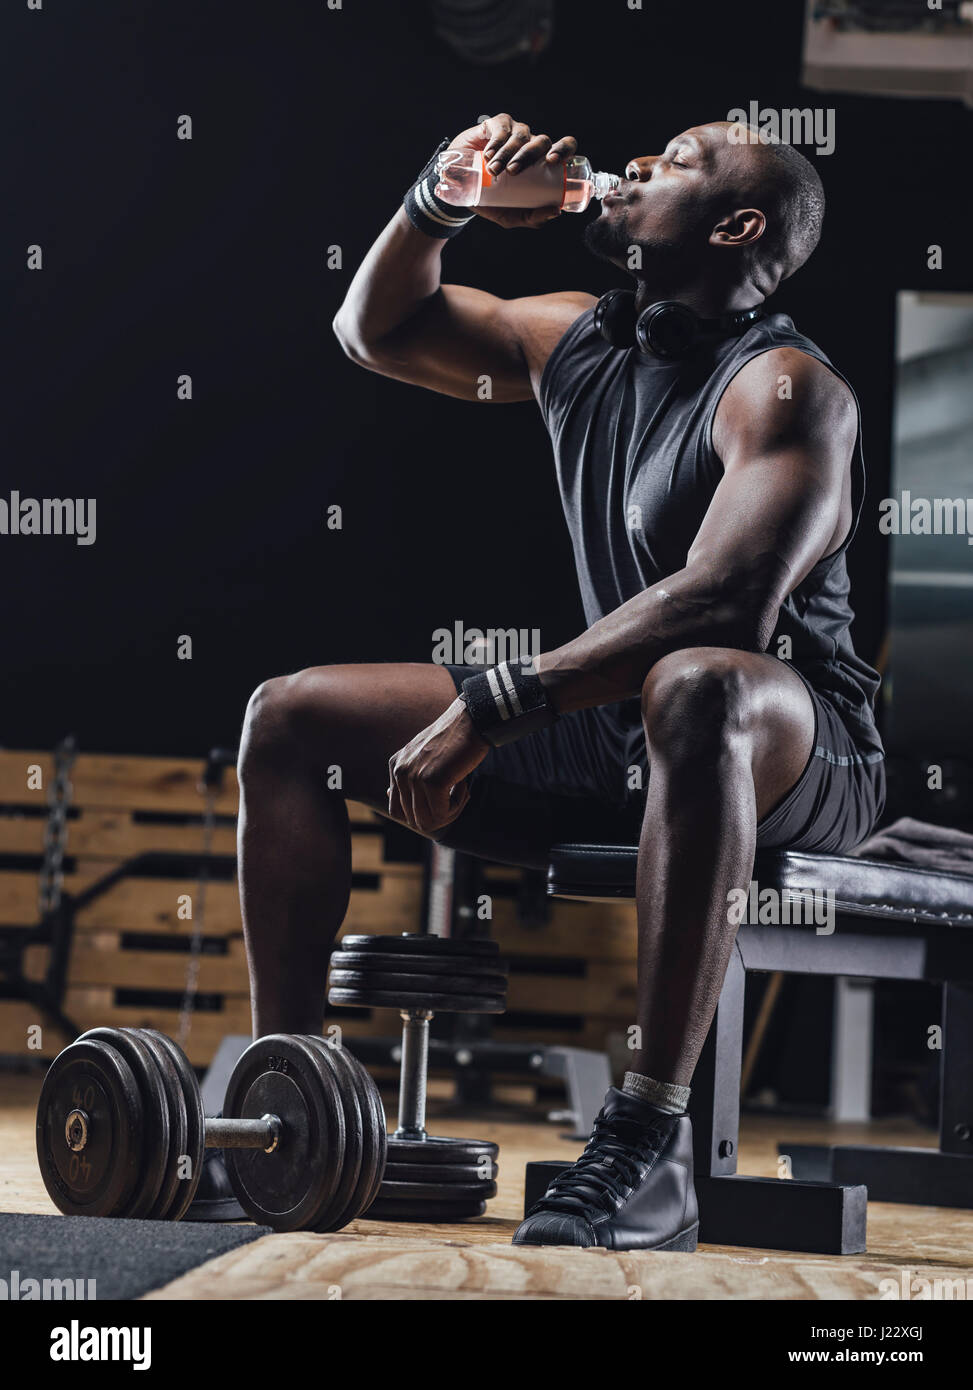 Athlete in gym relaxing after training Stock Photo